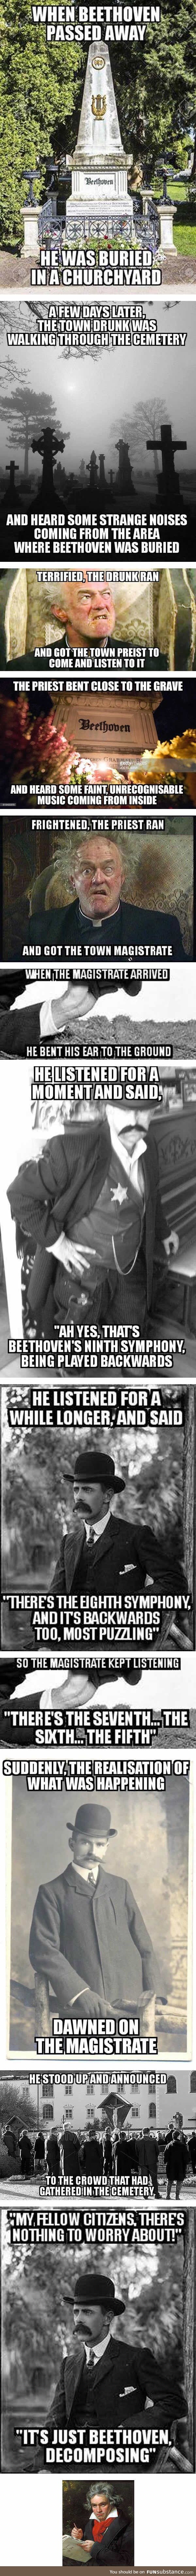 Just beethoven